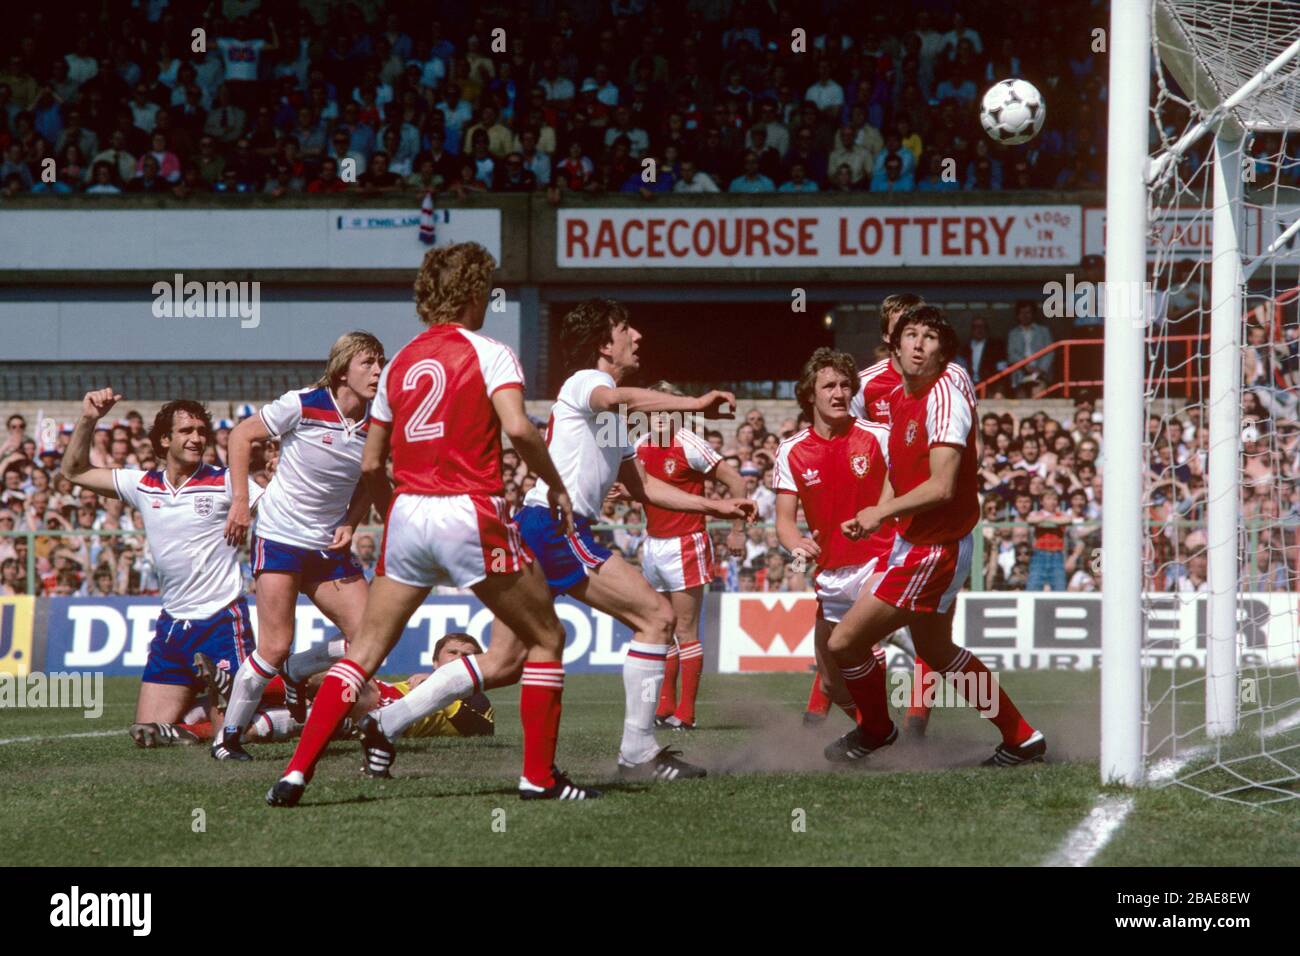 England's Paul Mariner (c) heads home his team's only goal, watched by teammates Larry Lloyd (l) and Peter Barnes (second l), and Wales's David Jones (r), Joey Jones (r, hidden), Peter Nicholas (third r), Terry Yorath (fourth r, half hidden), Paul Price (third l) and Dai Davies (l, on floor) Stock Photo